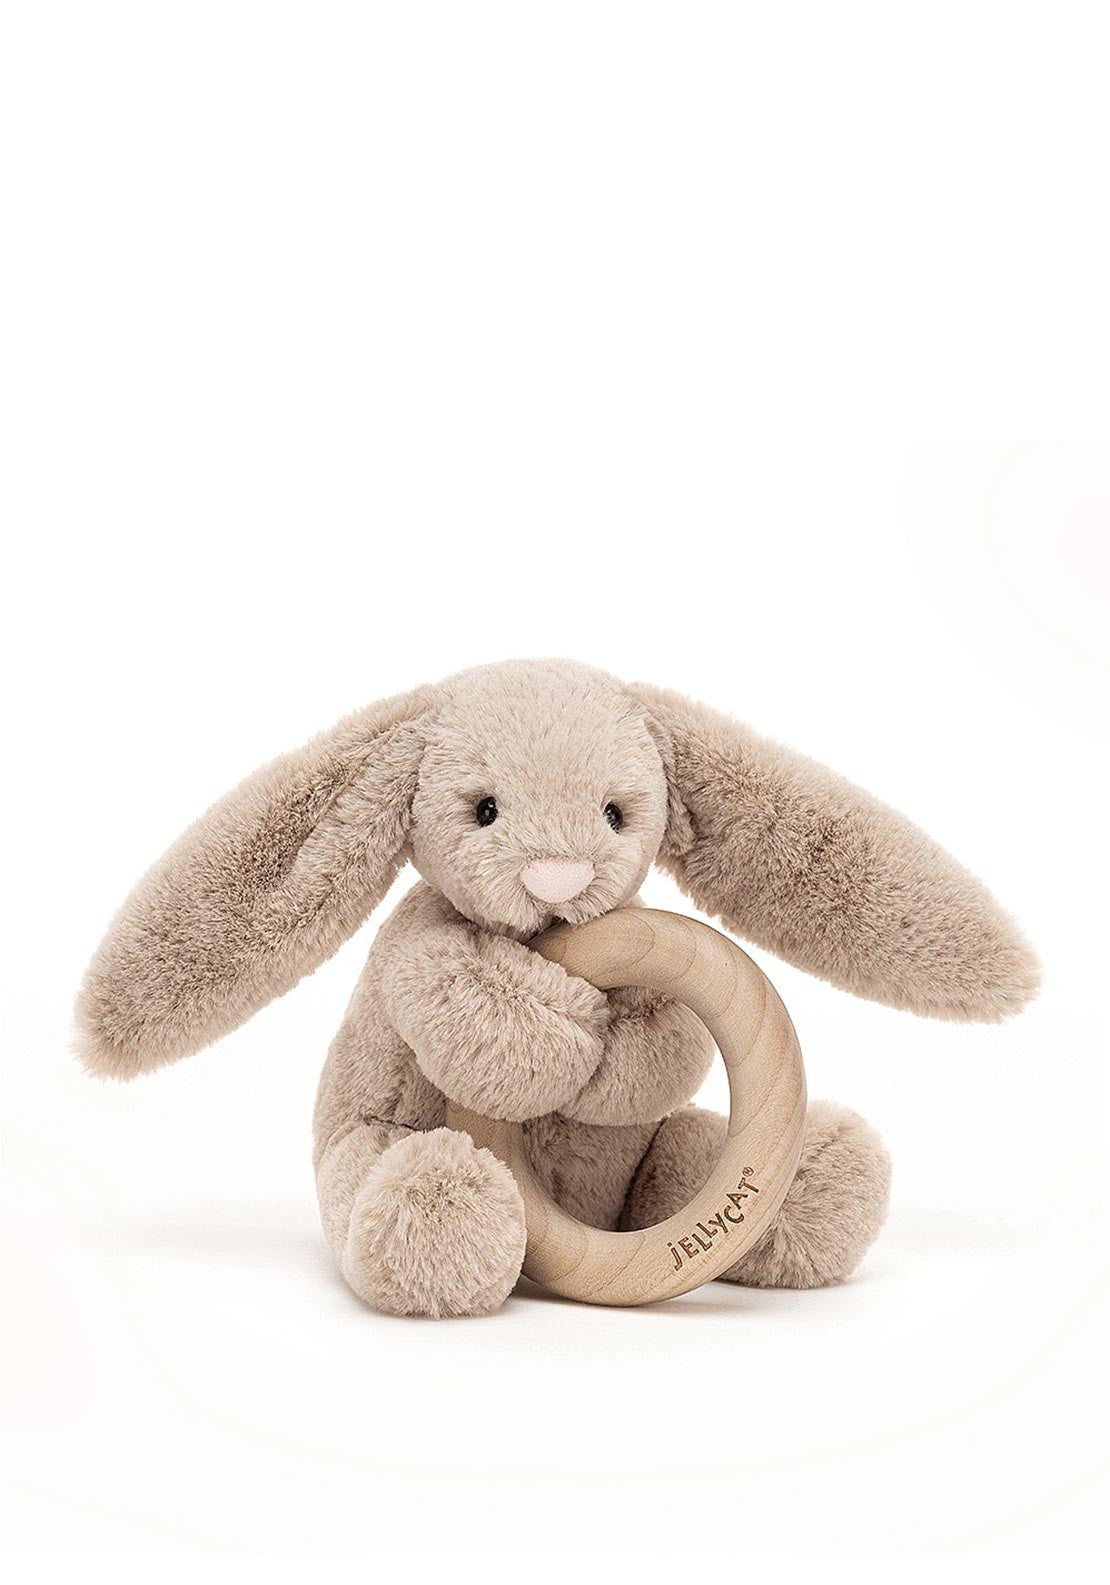 Jellycat Soft Toy - Bashful Beige Bunny Wooden Ring Toy (13cm tall)